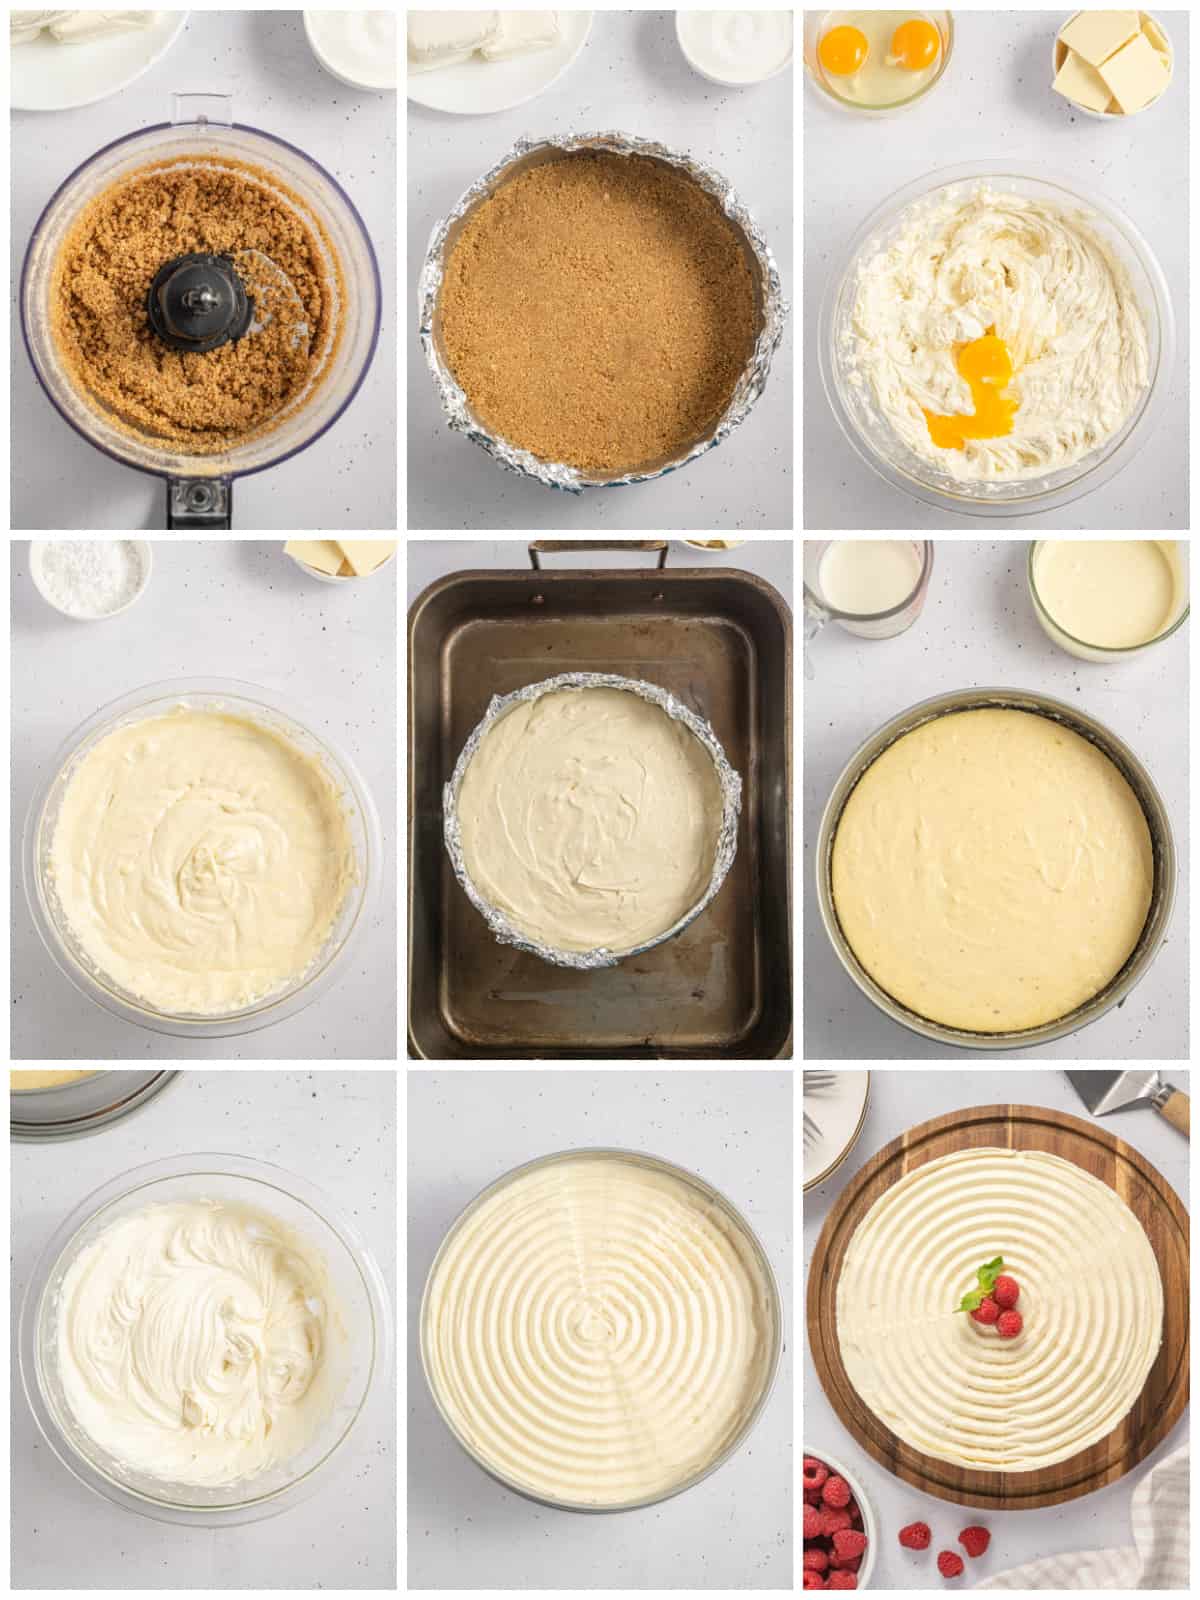 Step by step photos on how to make Vanilla Bean Cheesecake.